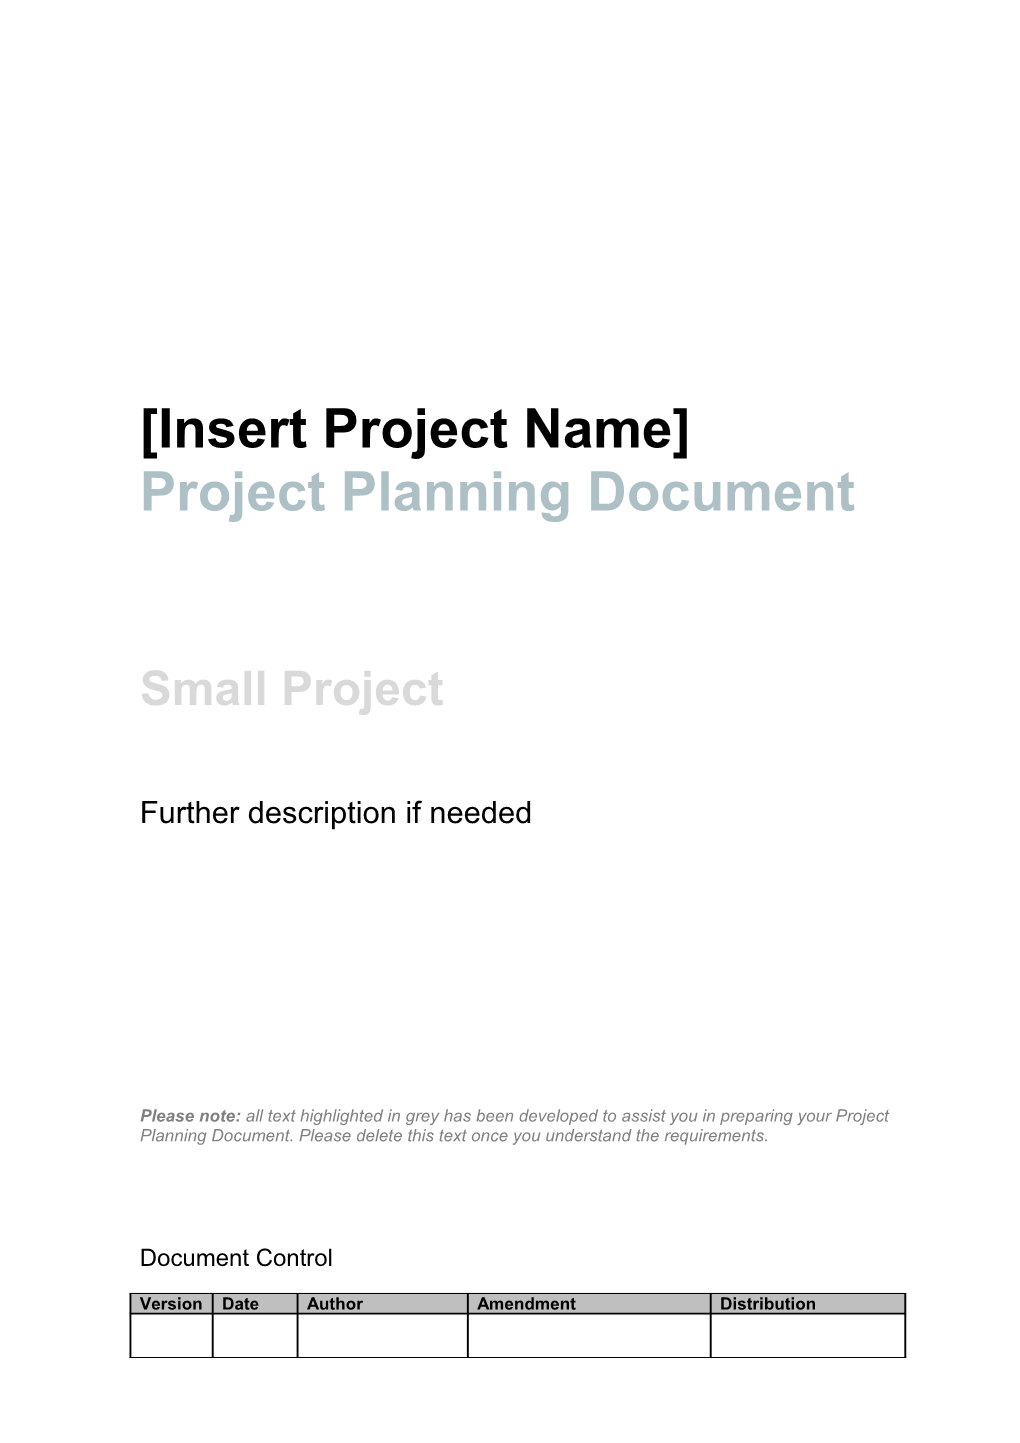 Project Planning Document Template Small Project